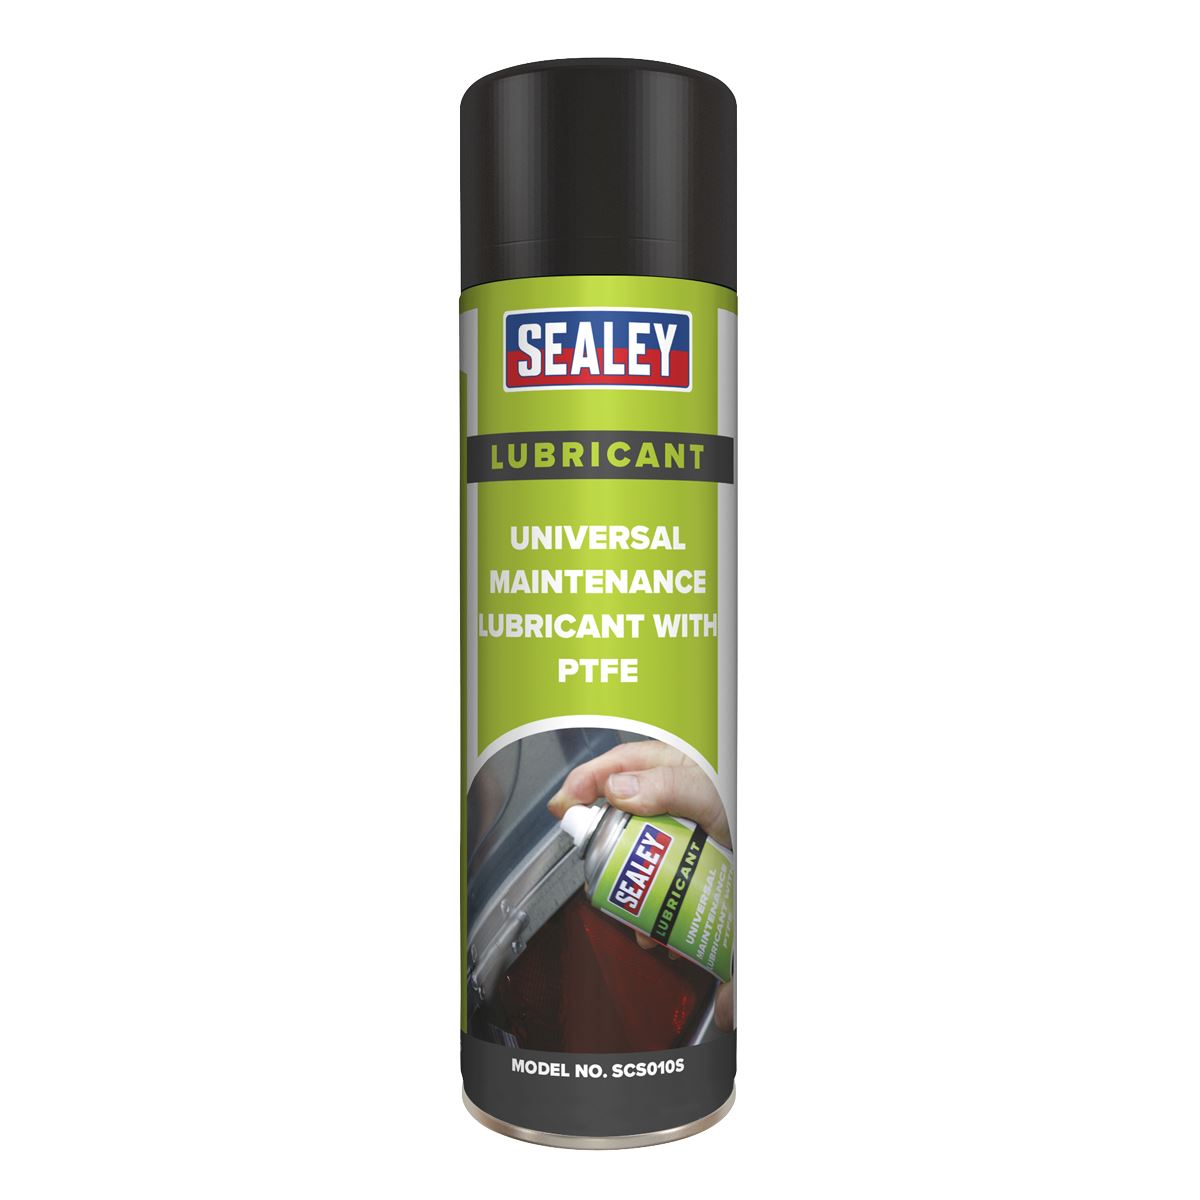 Sealey Universal Maintenance Lubricant with PTFE 500ml Pack of 6